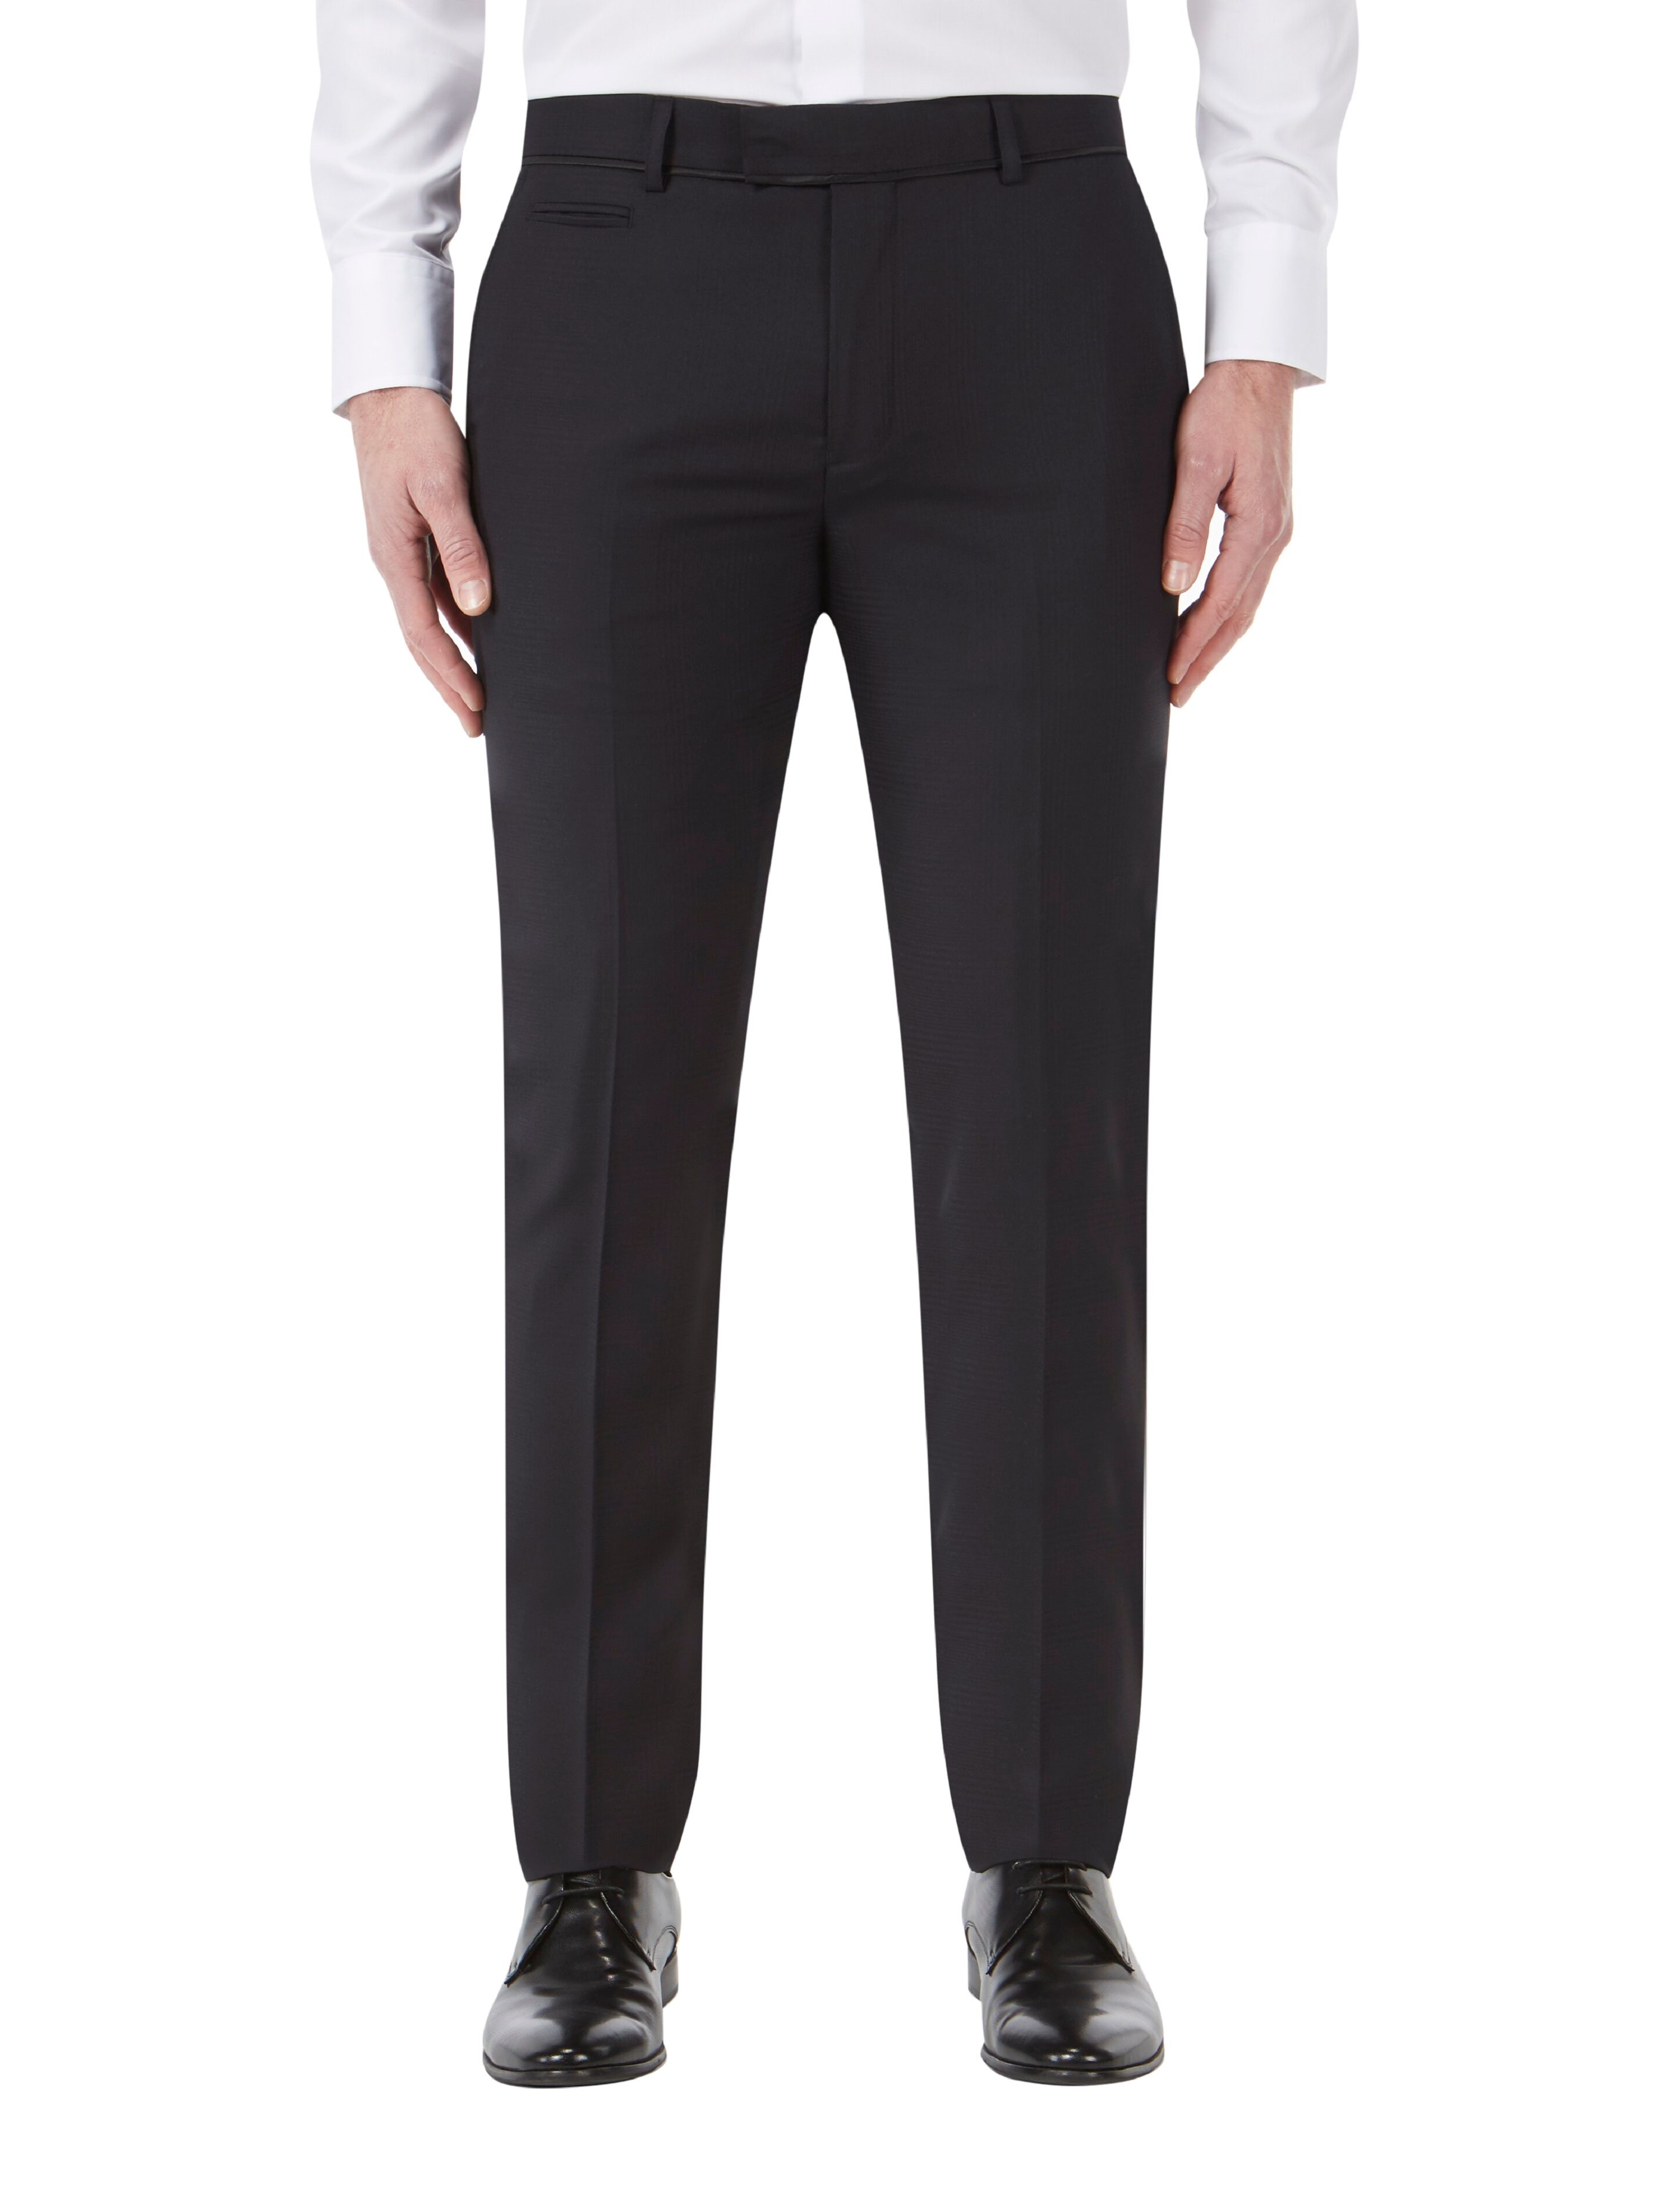 Newman Black Slim Fit Dinner Trousers - 4 The Wedding